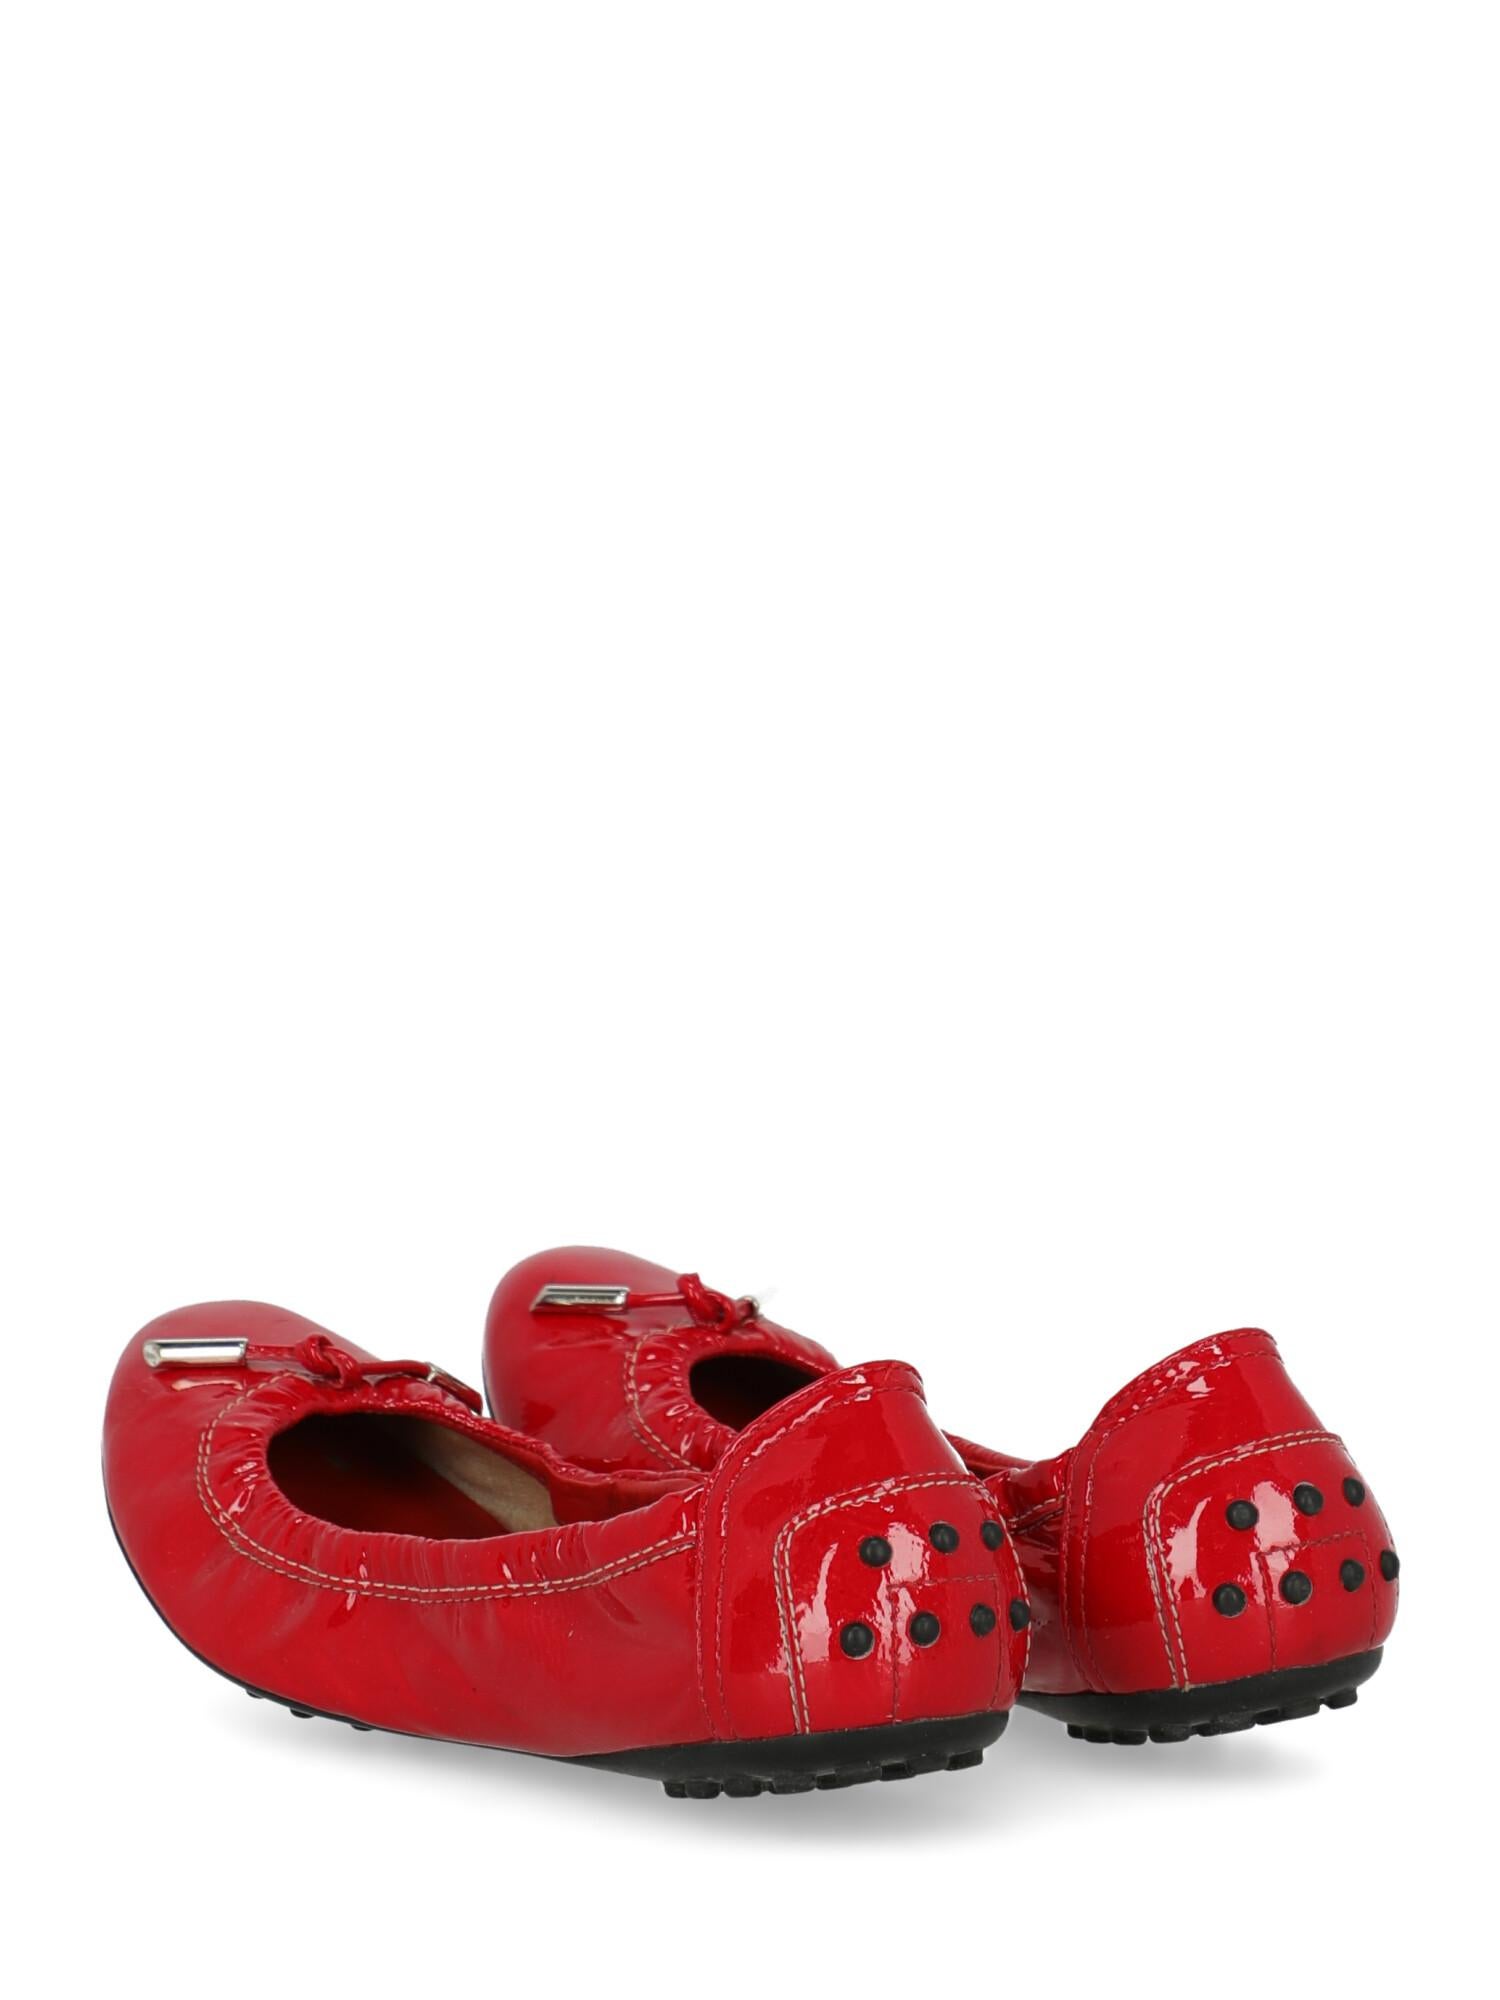 Women's Tod'S Woman Ballet flats Red Leather IT 36.5 For Sale